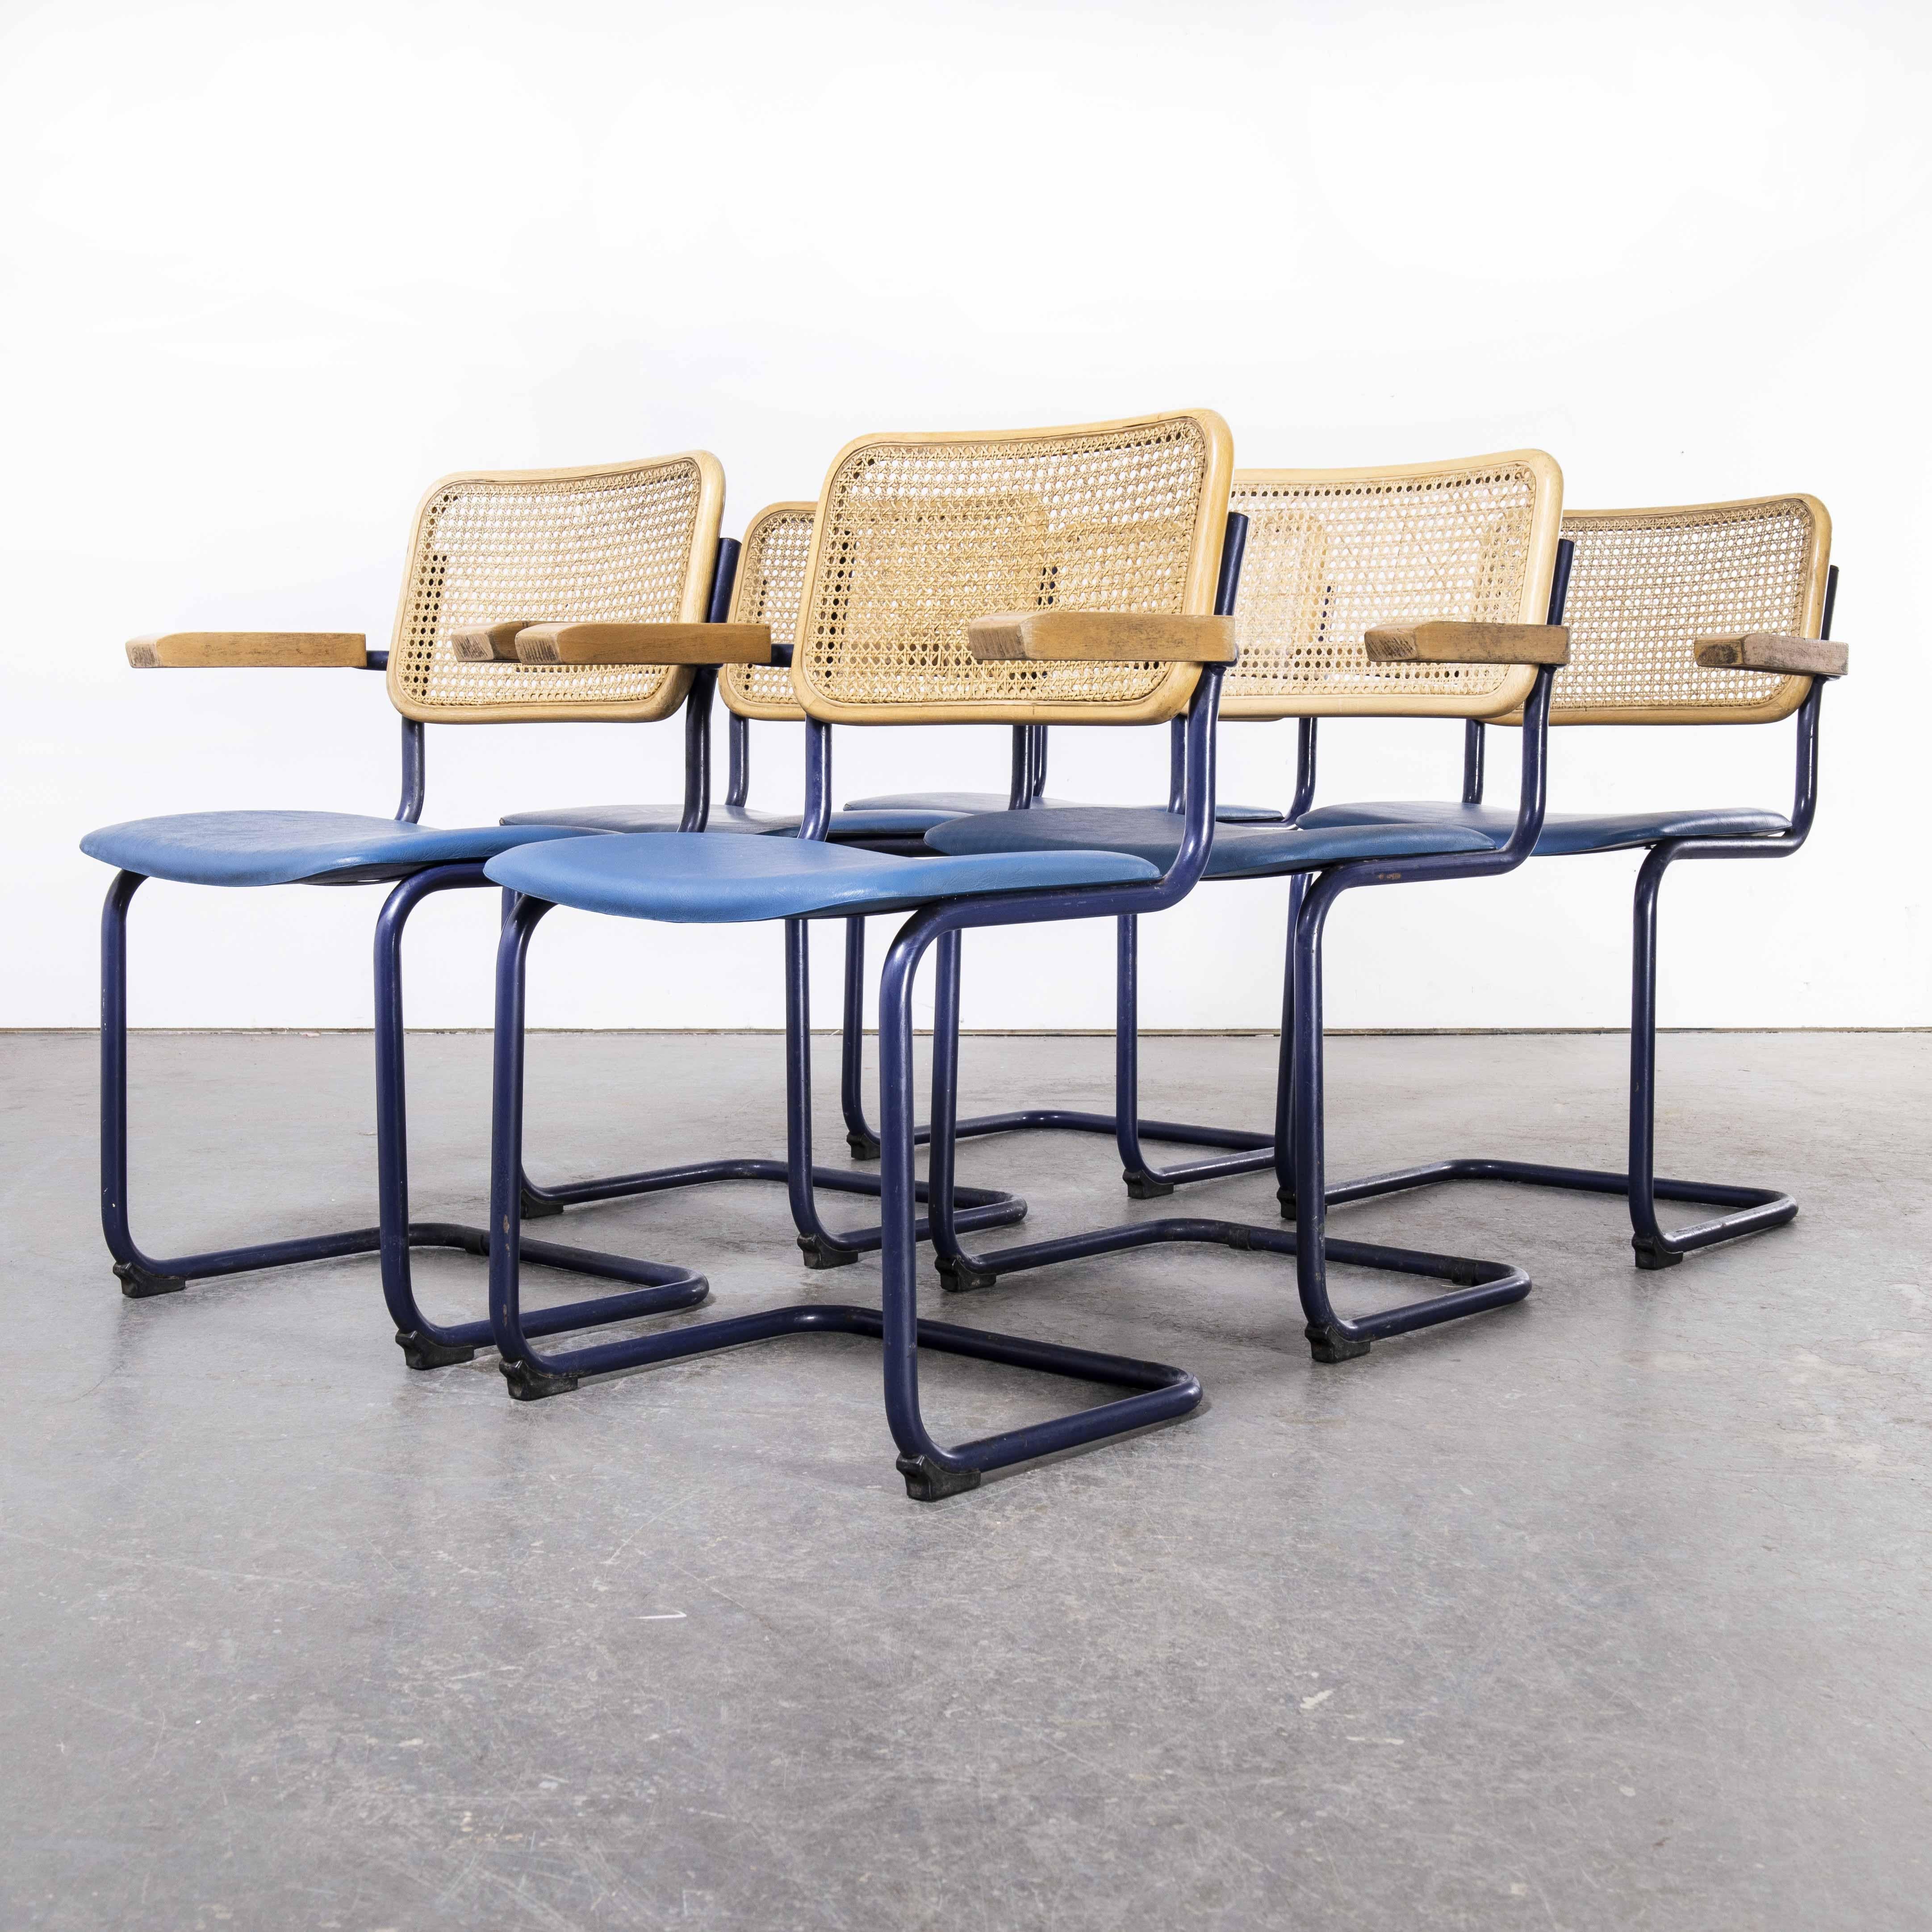 1970’s Cantilever frame cane backed dining chair – set of six
1970’s Cantilever frame cane backed dining chair – set of six. Classic Bauhaus style cantilever frame dining chair unusually produced with powder blue frames and beech capped arms.